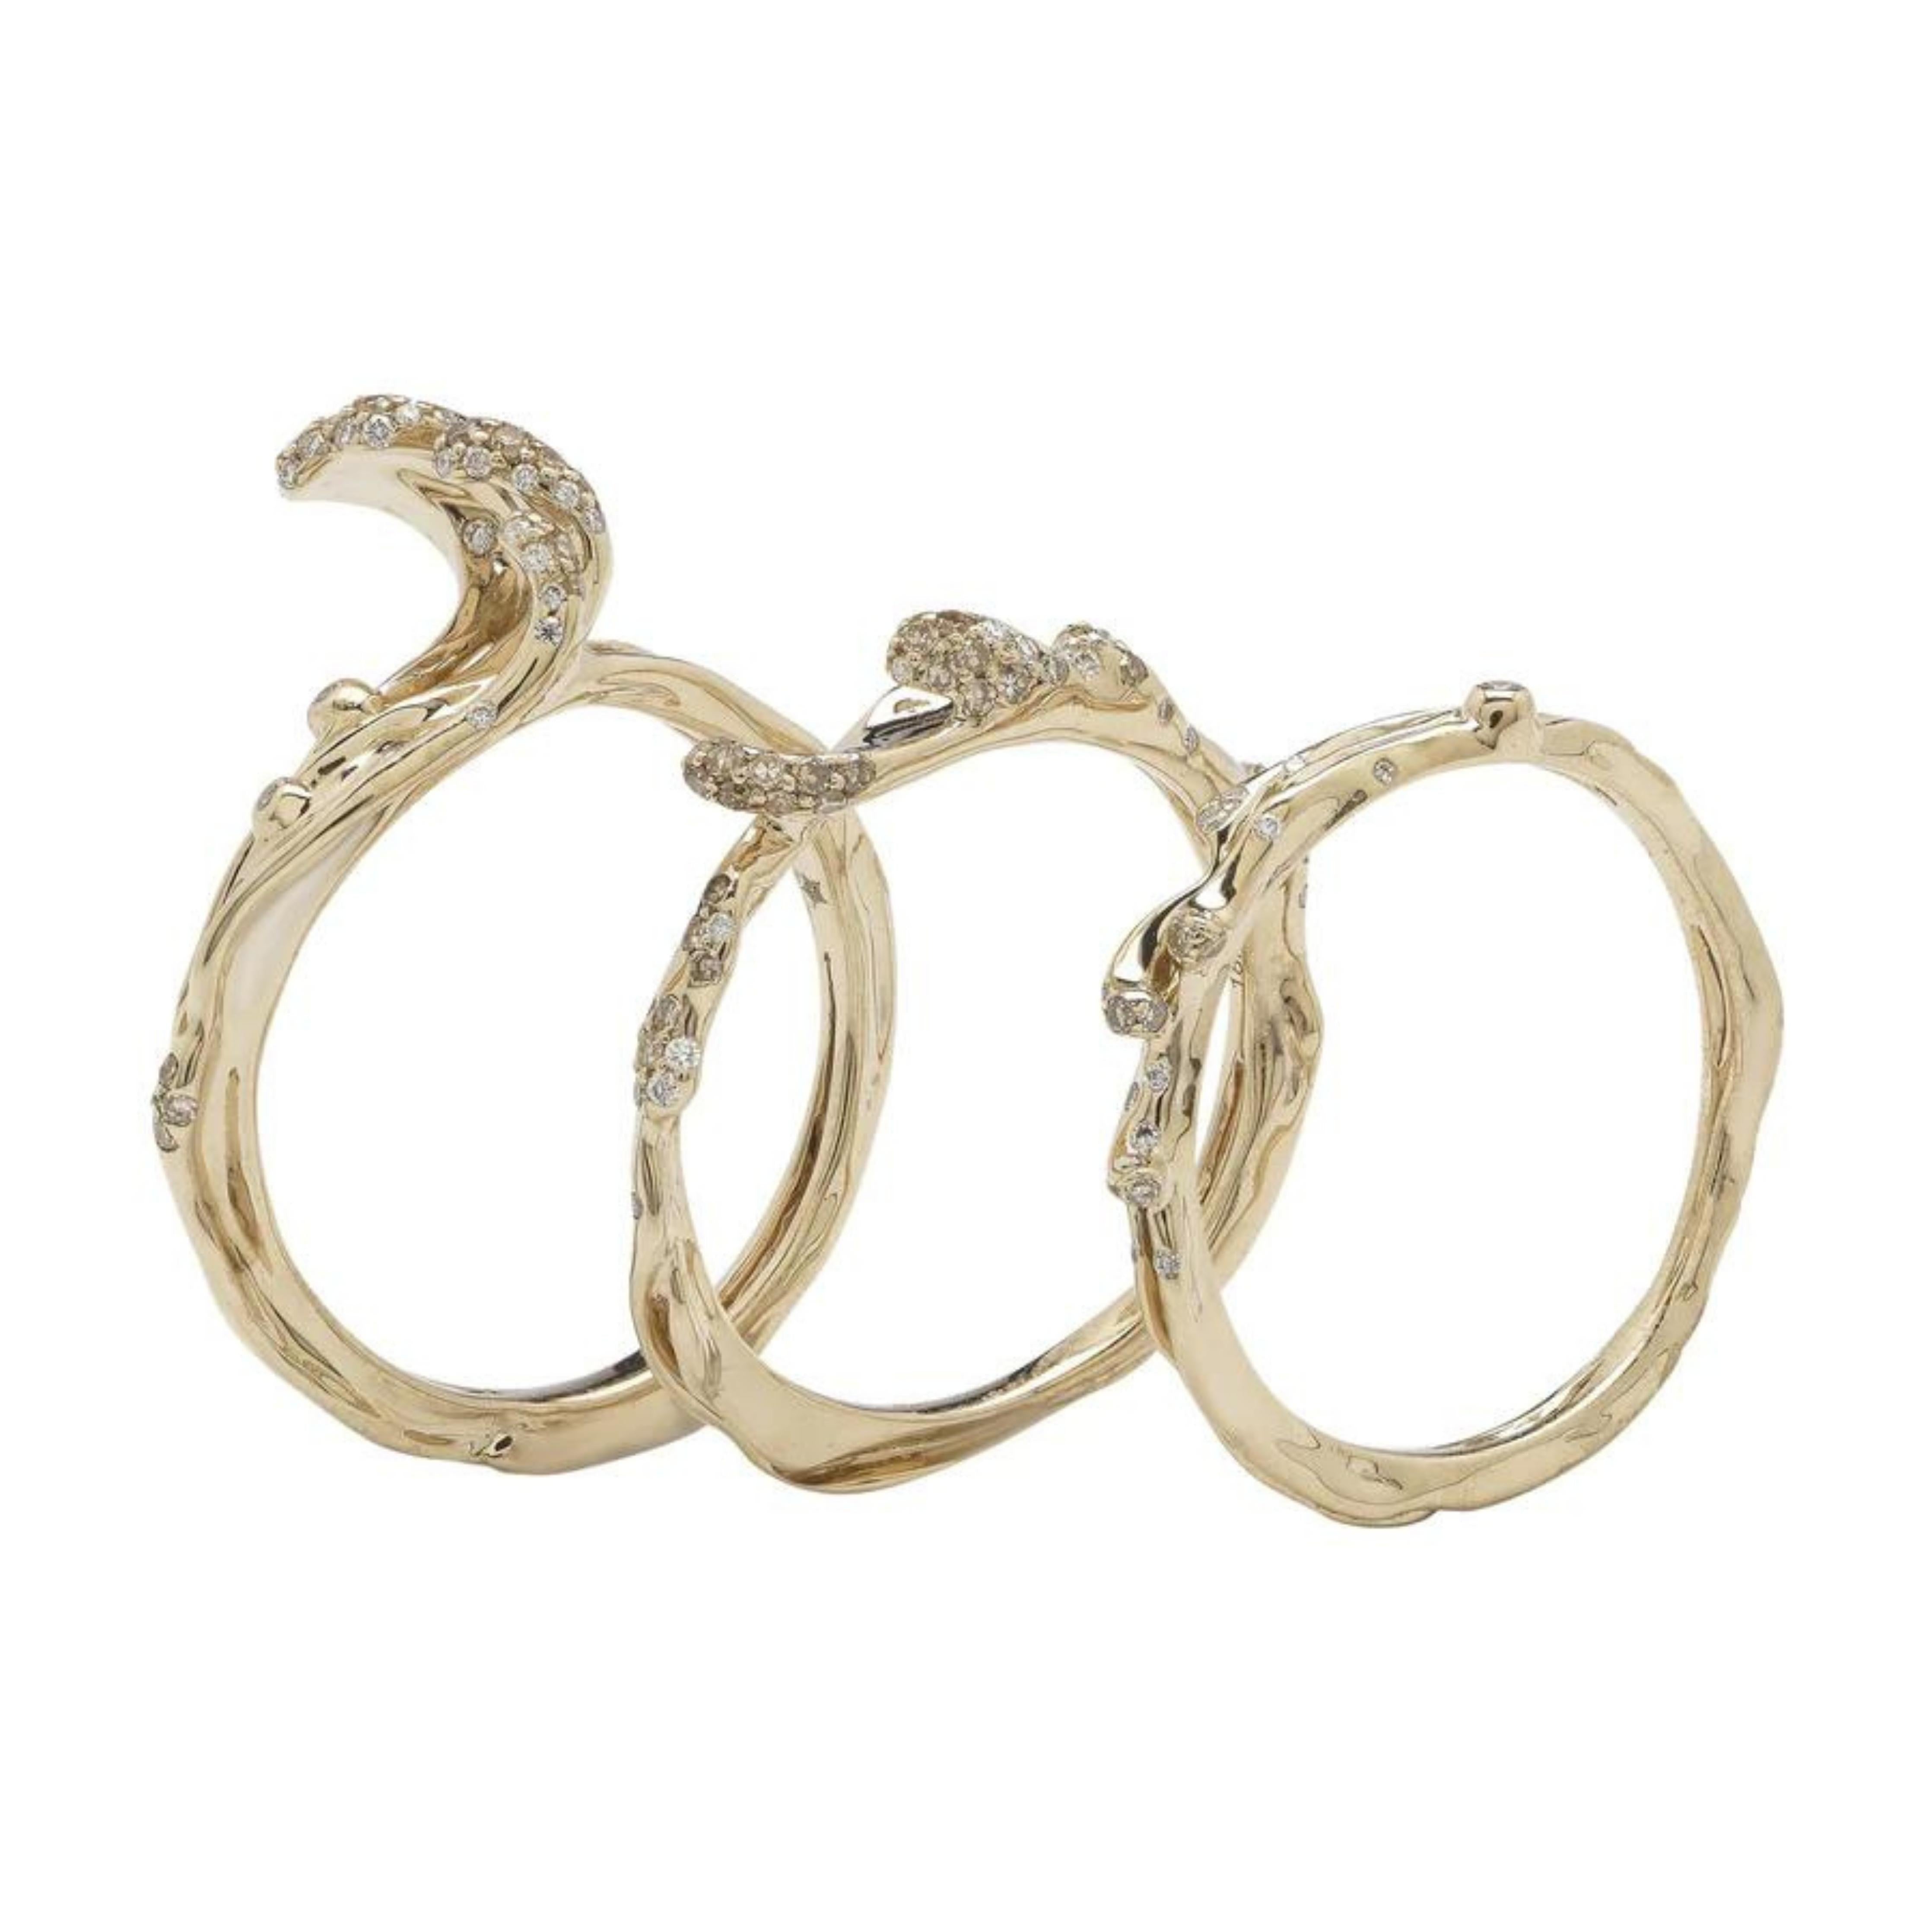 Wave Stackable Rings are three rings that can be snapped together to be worn as one piece, or purchased and worn as individual rings. Designed in pure 18k white gold, which has a slightly yellow tone, the rings are set with light brown and white diamonds. Shown with other stackable wave rings.